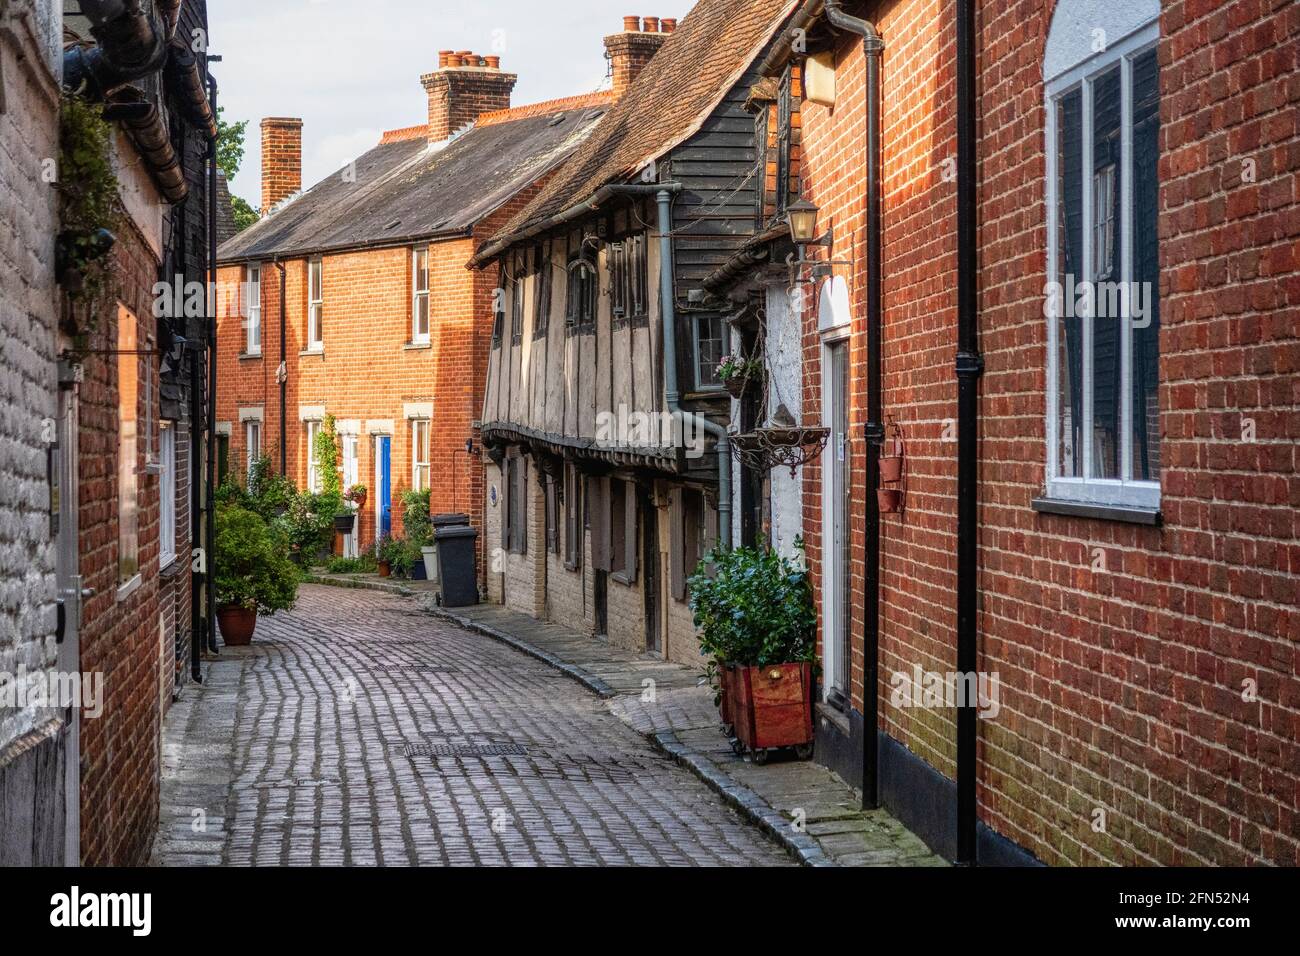 Historic cobbled street in the Cathedral city of Canterbury in Kent, UK. Timber framed buildings mixed with later brick built houses. Stock Photo